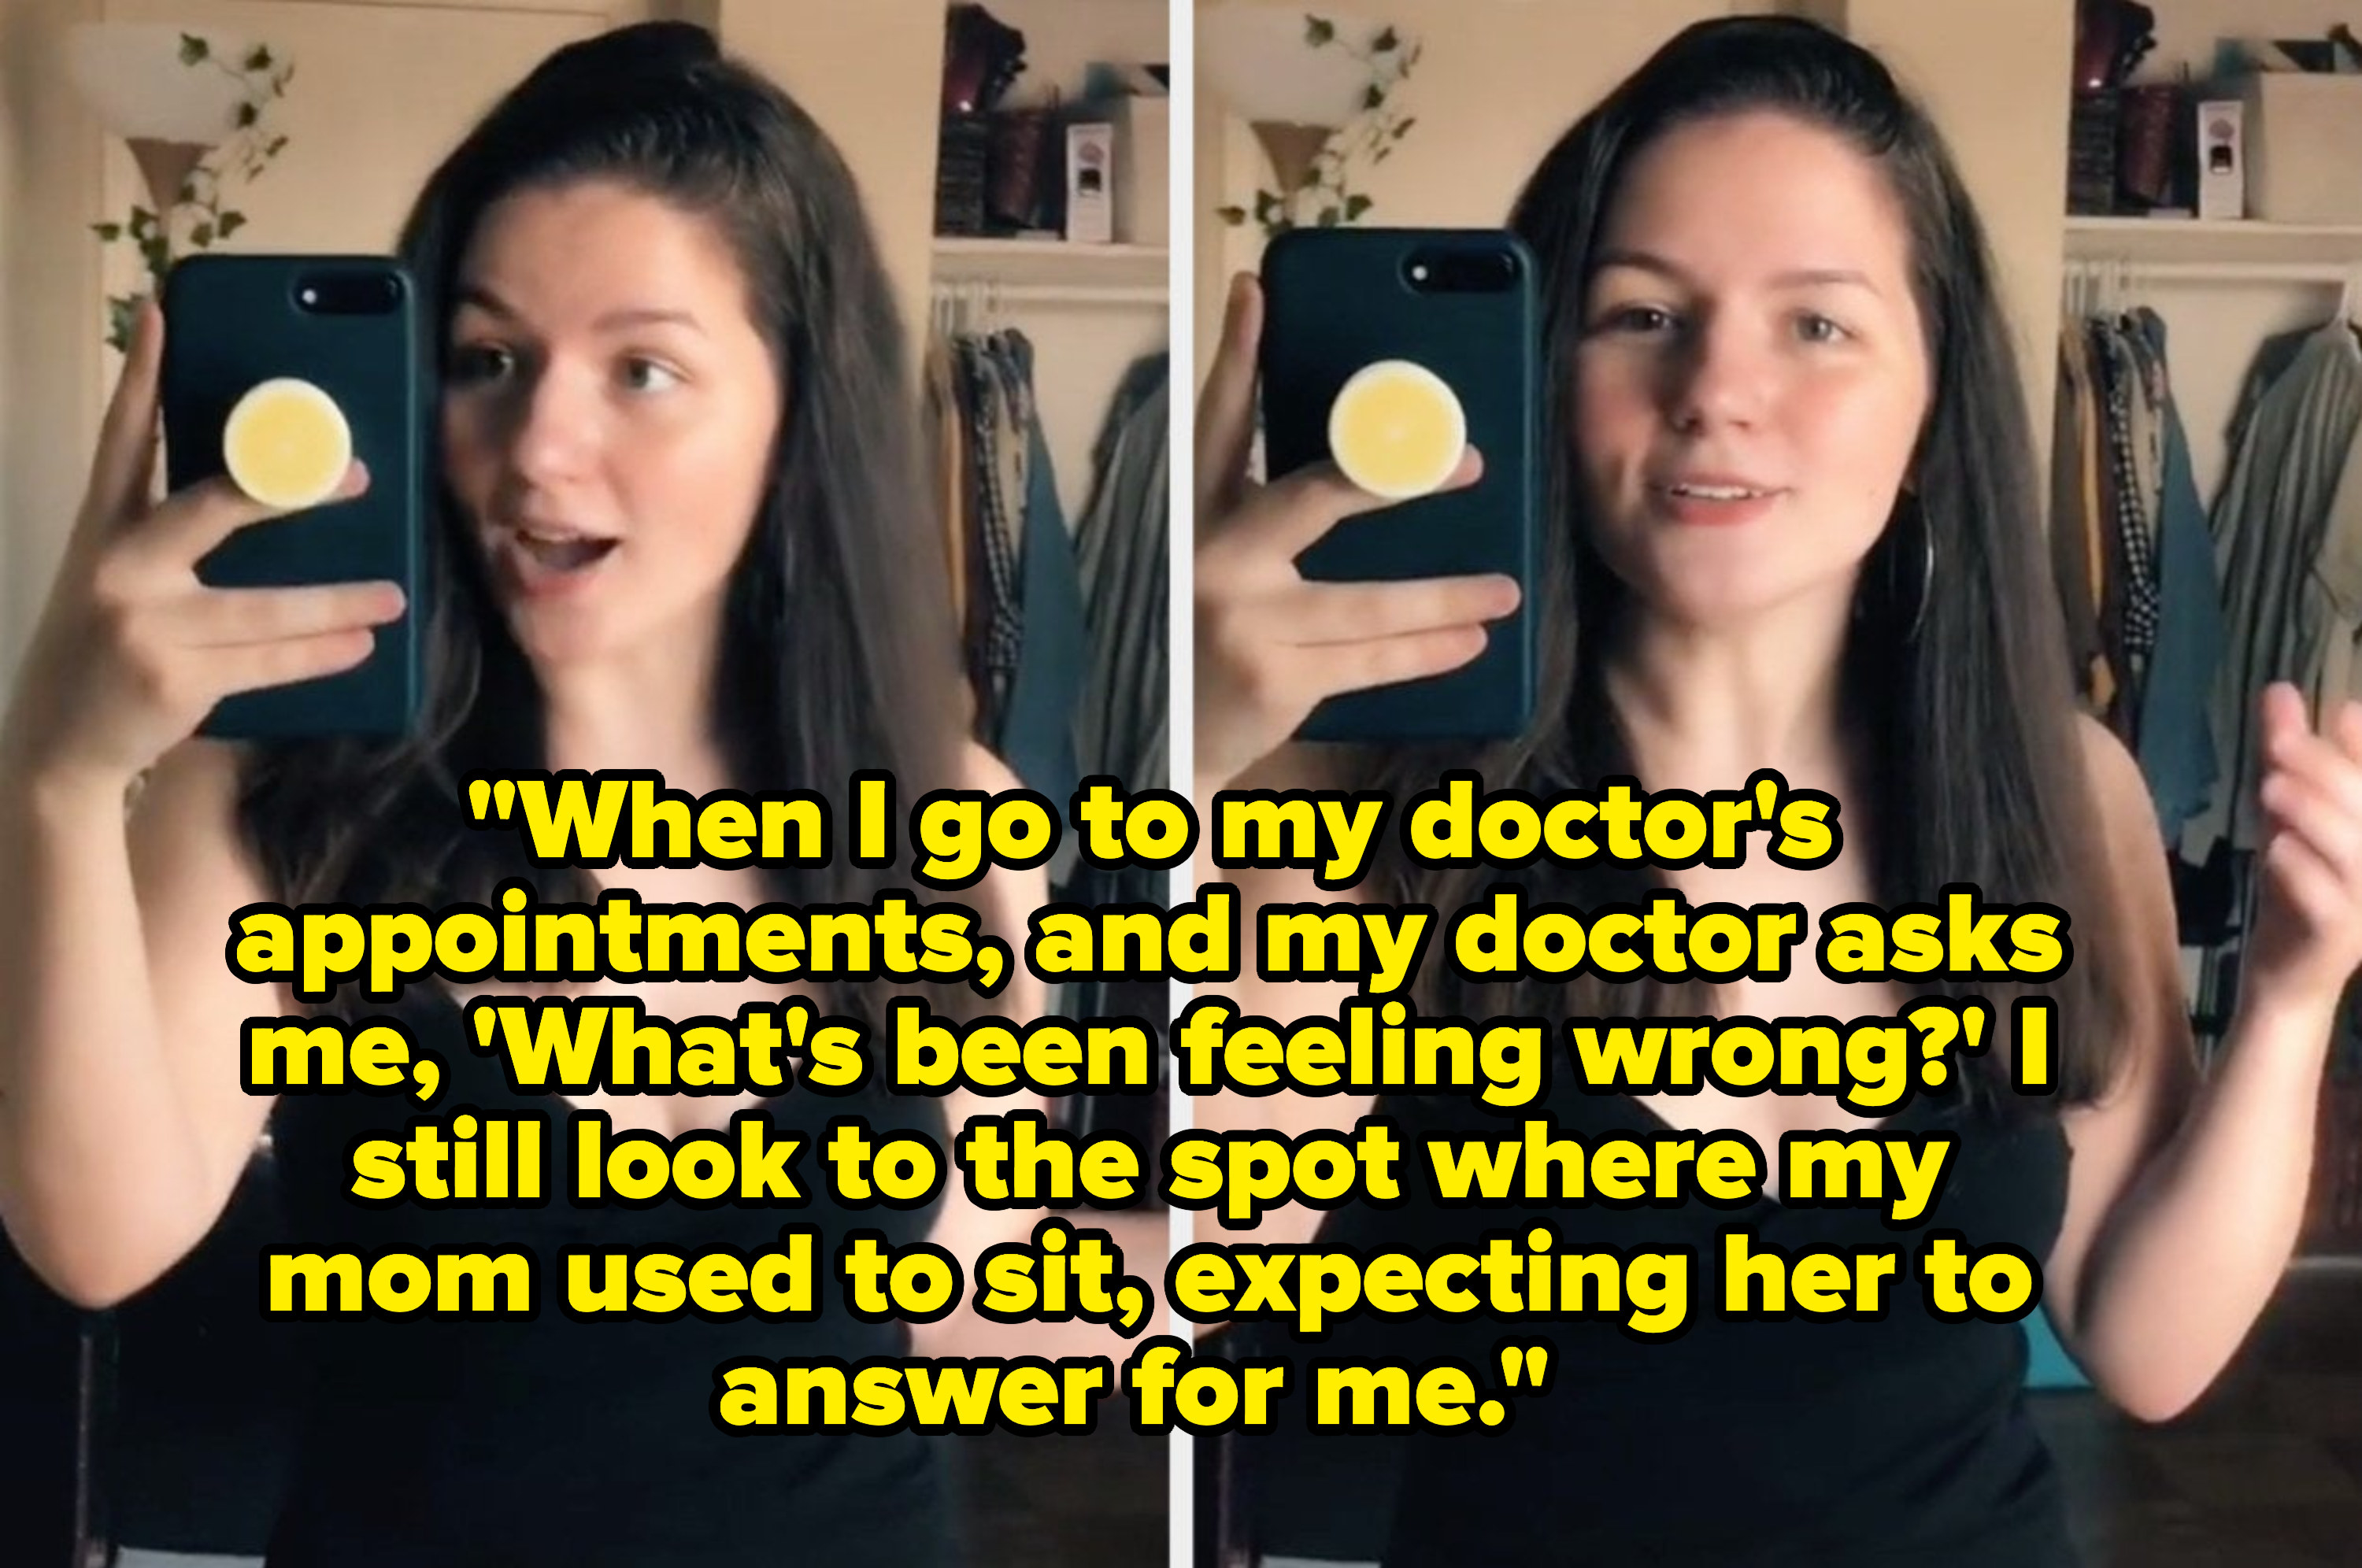 A TikToker says, &quot;When I go to my doctor&#x27;s appointments, and my doctor asks me, &#x27;What&#x27;s been feeling wrong?&#x27; I still look to the spot where my mom used to sit, expecting her to answer for me&quot;